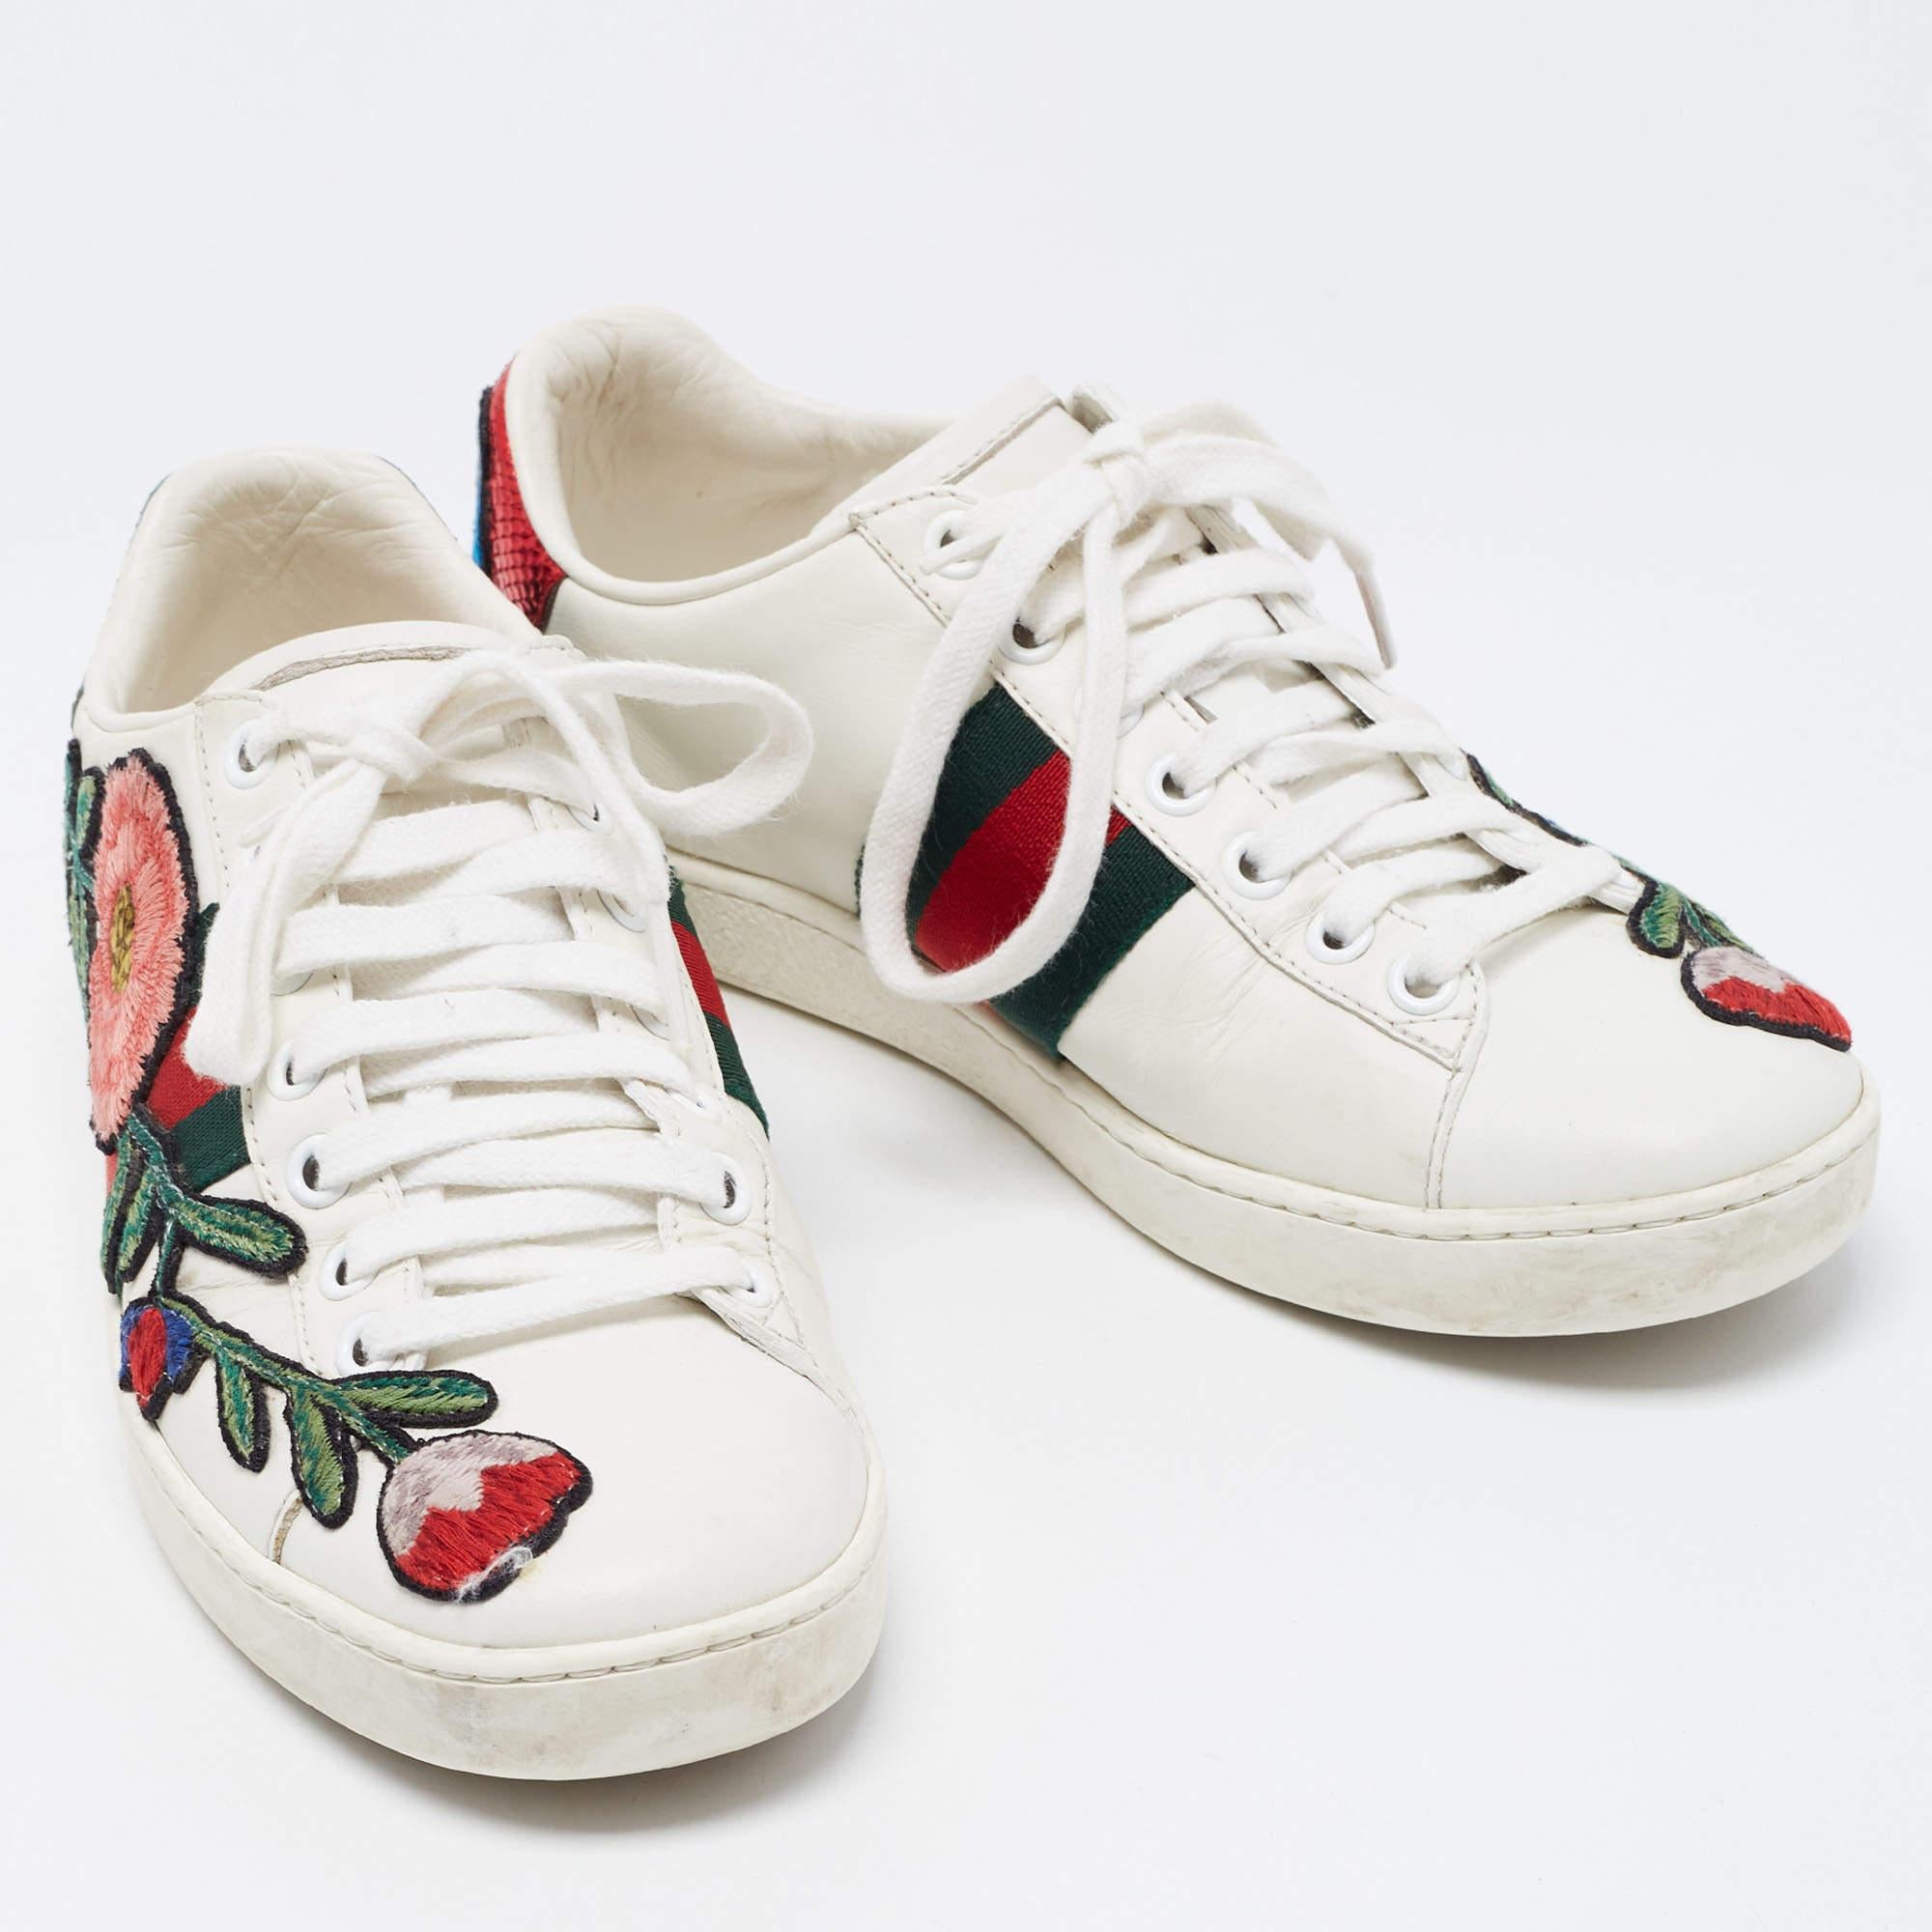 Stacked with signature details, this Gucci pair is rendered in leather and is designed in a low-cut style with lace-up vamps. They have been fashioned with the iconic web stripes and floral embroidery. Complete with red and green trims carrying the